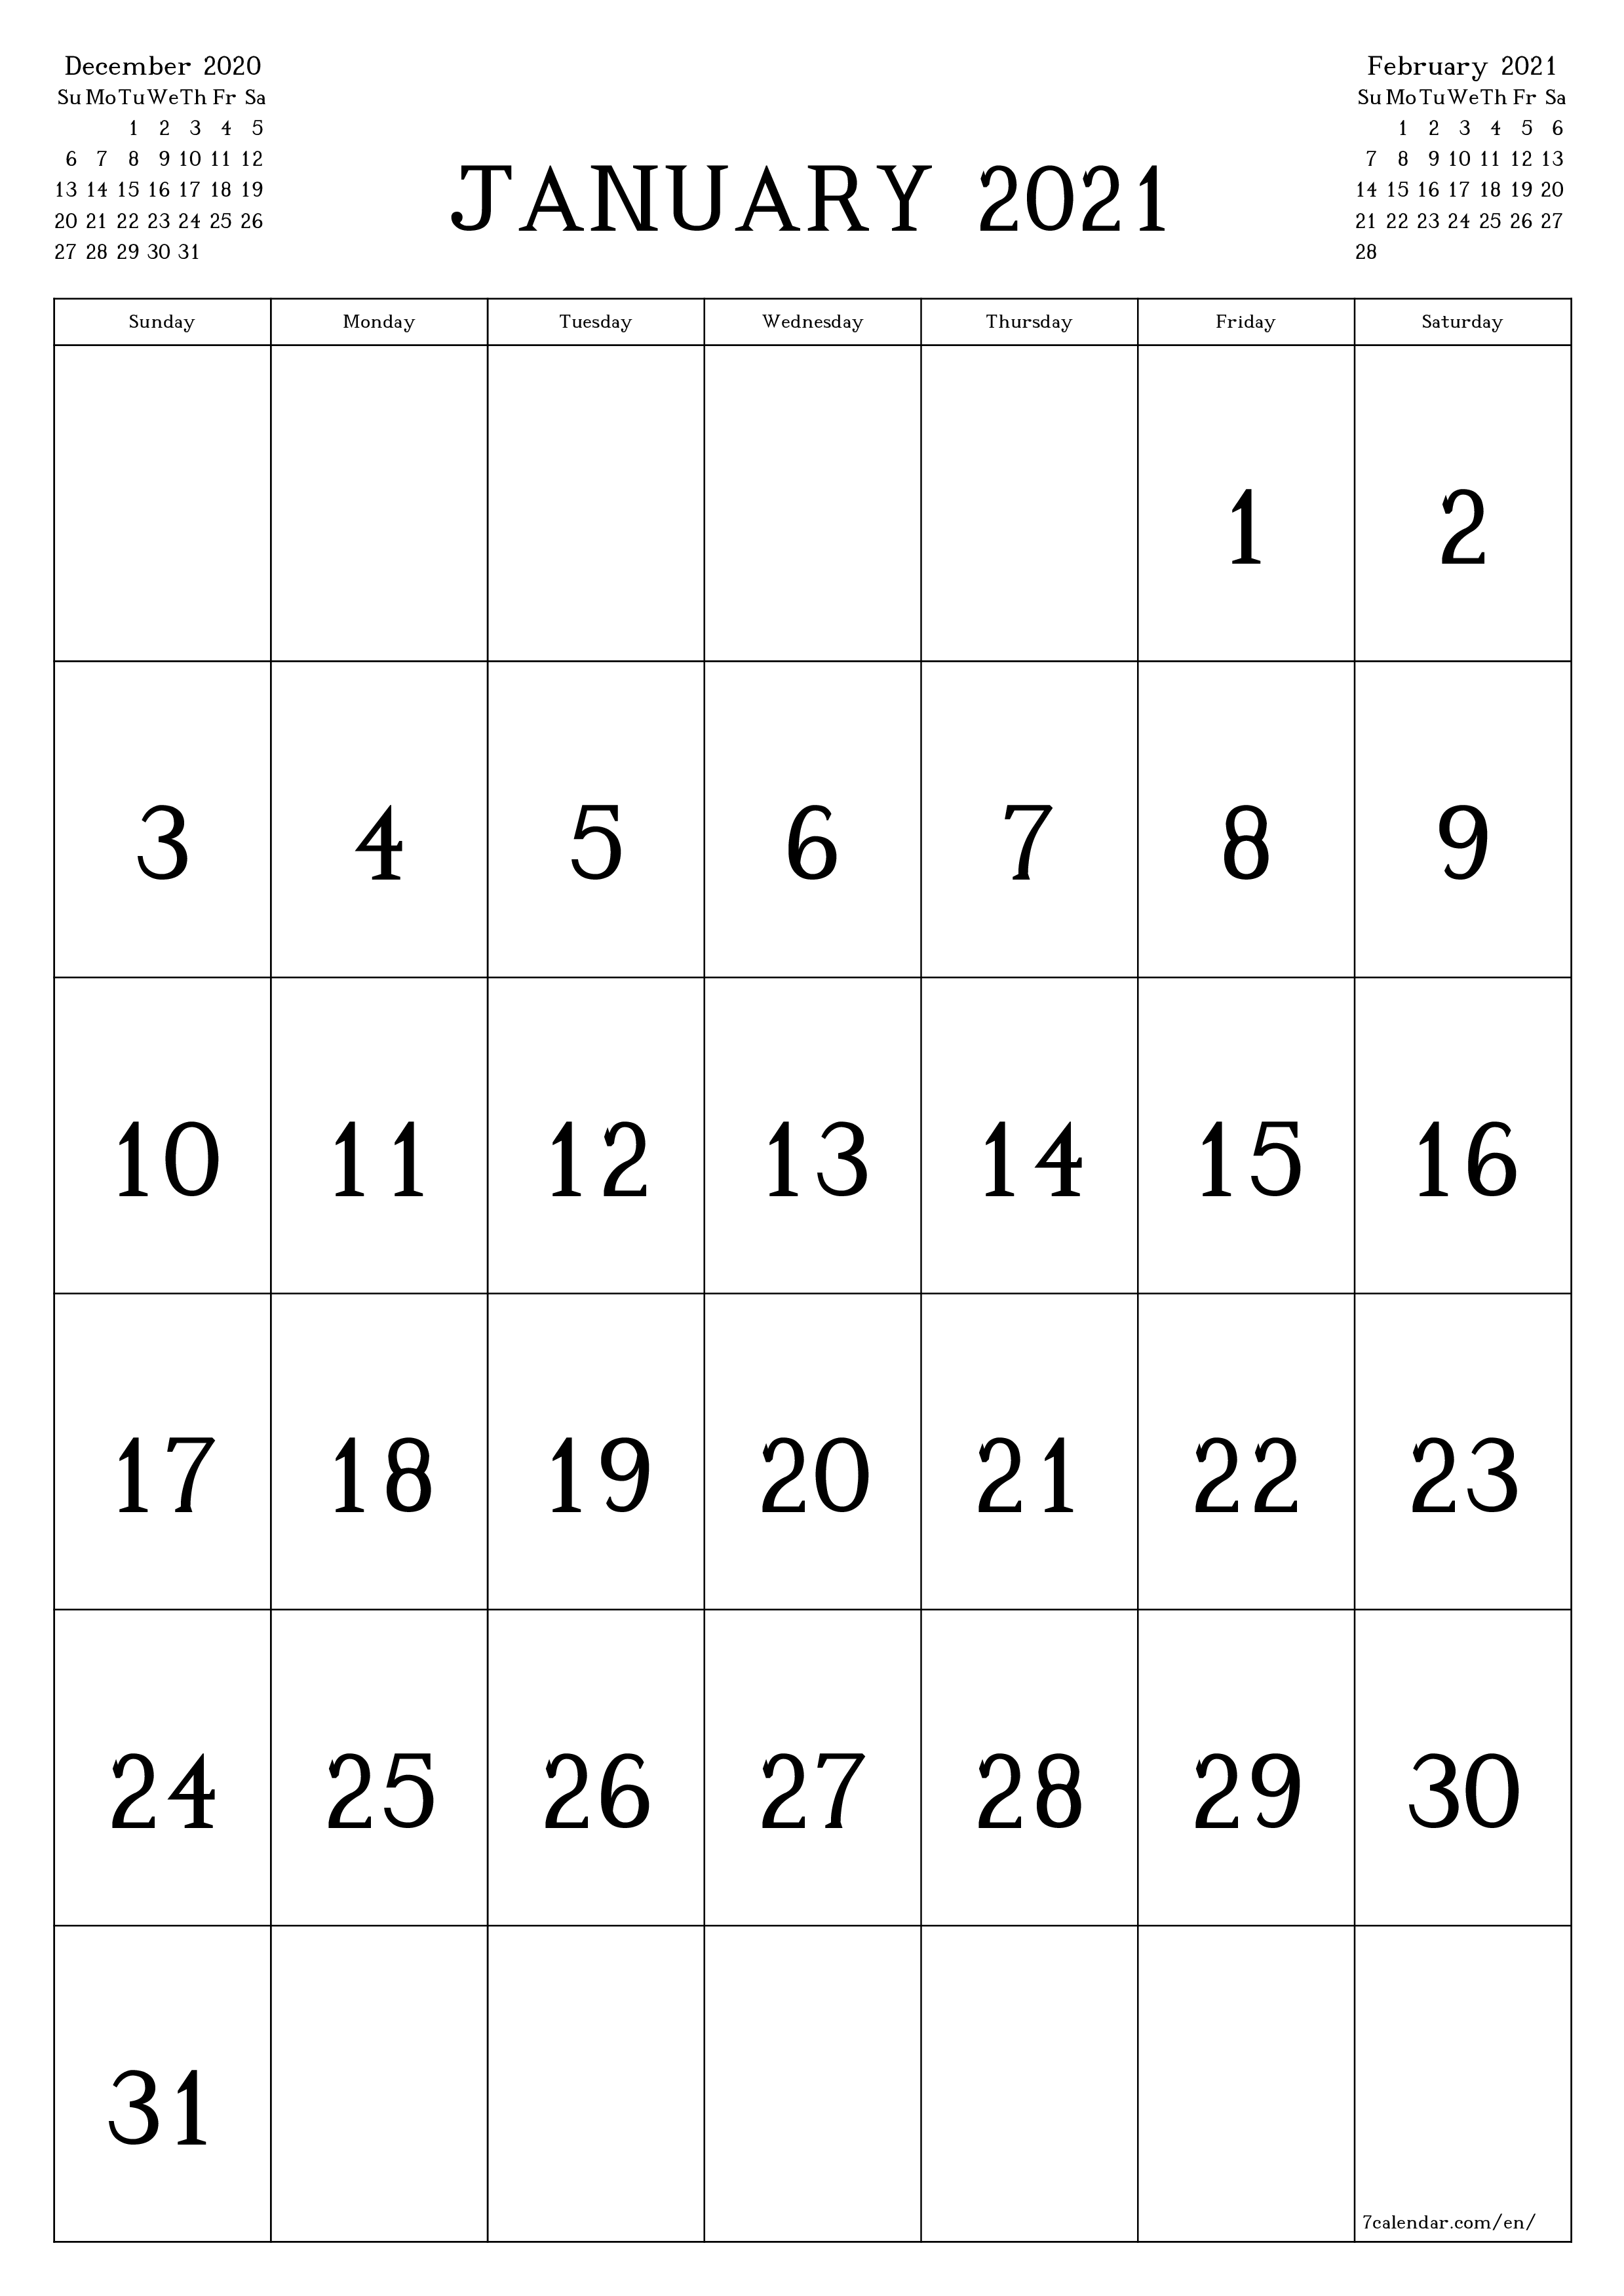 Blank monthly dated HD template image of calendar for month January 2021 save and print to PDF PNG English - 7calendar.com